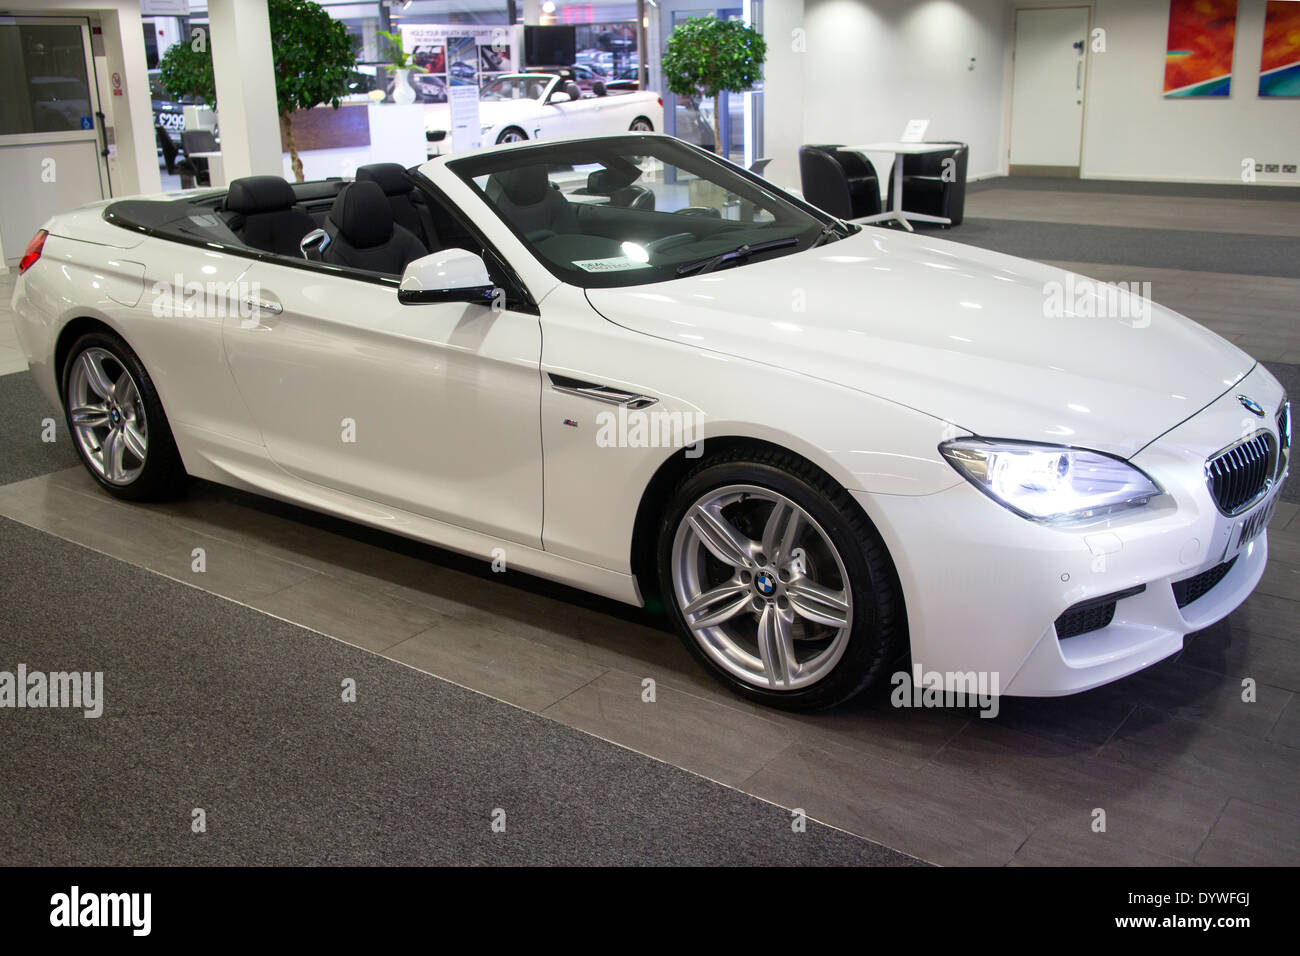 Brand new White BMW 6 Series M Sport Convertible 2 door 640d with roof down in car showroom Stock Photo